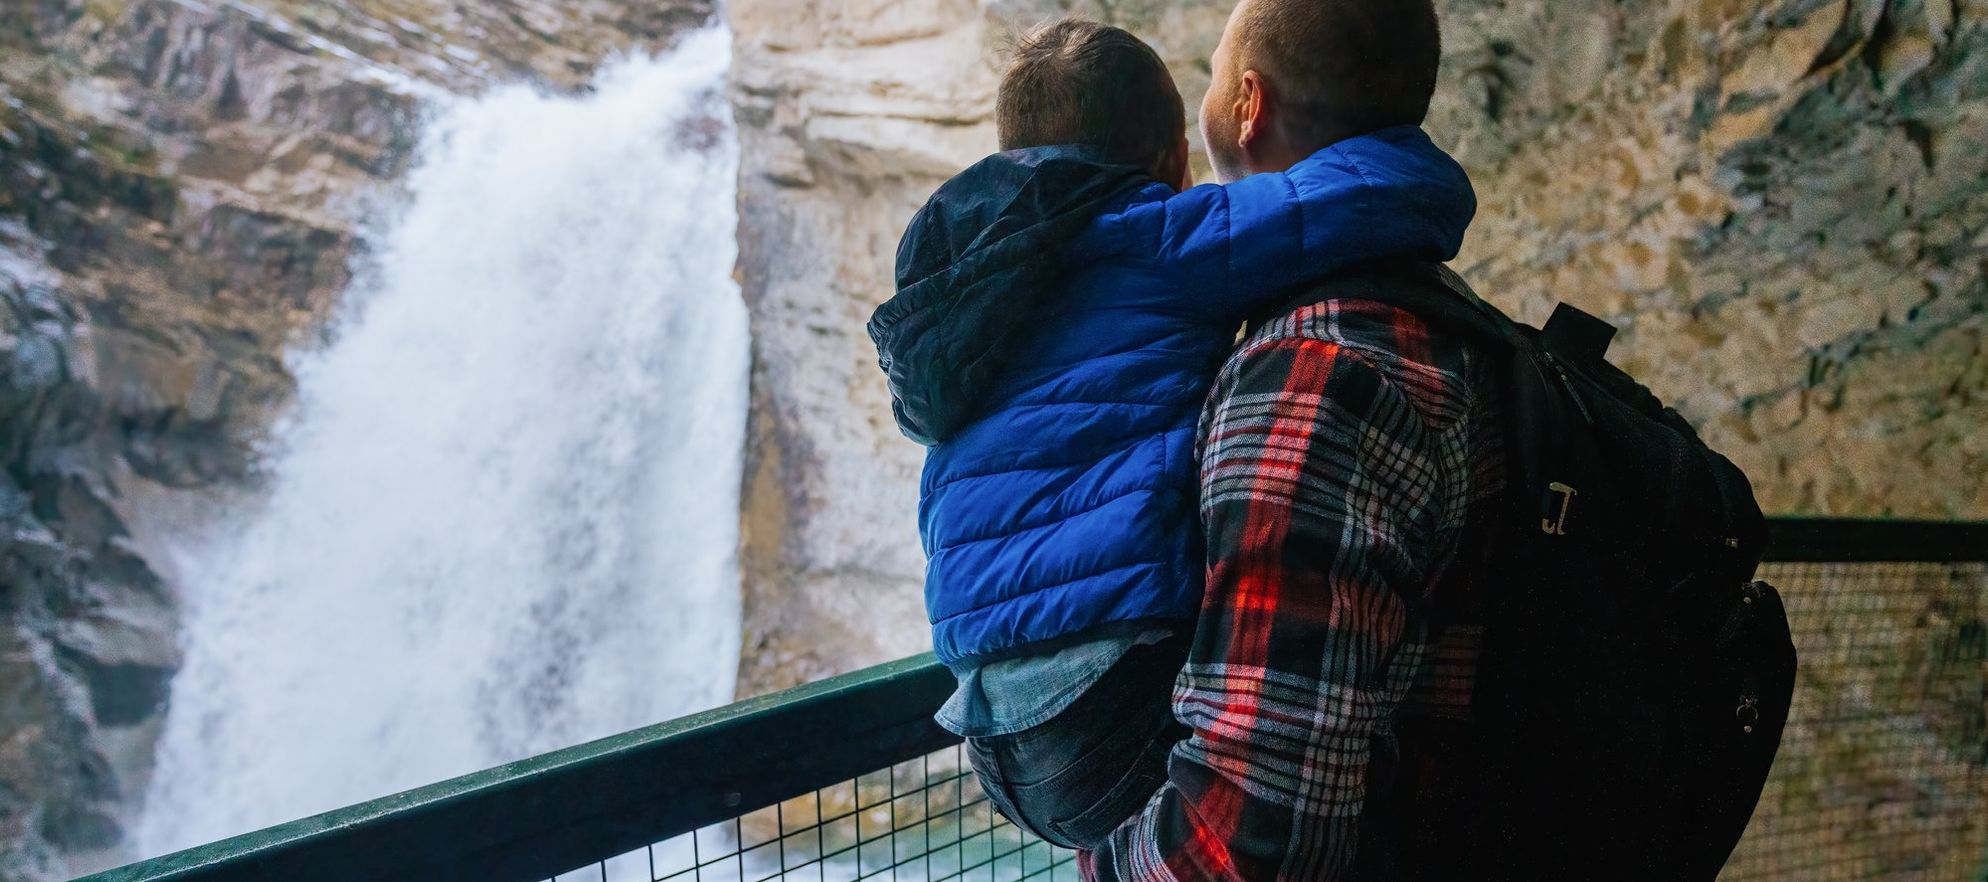 A father wearing a red flannel shirt holds his son in a bright blue jacket as they look at a rushing waterfall from behind the safety of a guardrail